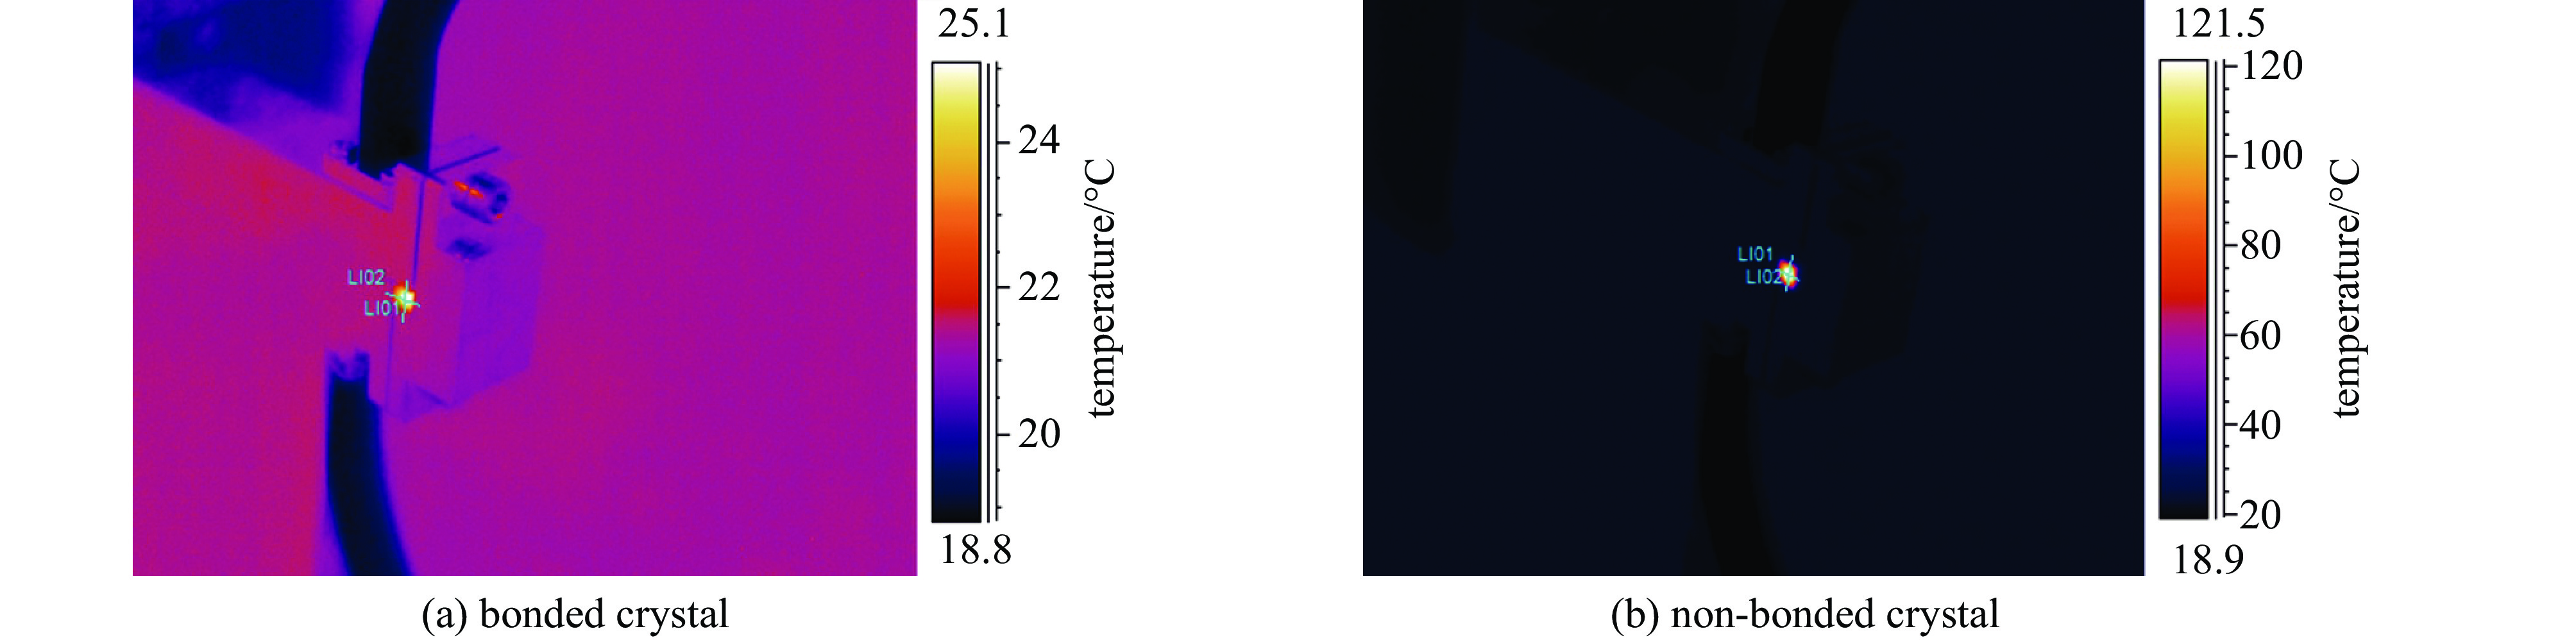 Temperature distribution of the front surface of the crystal